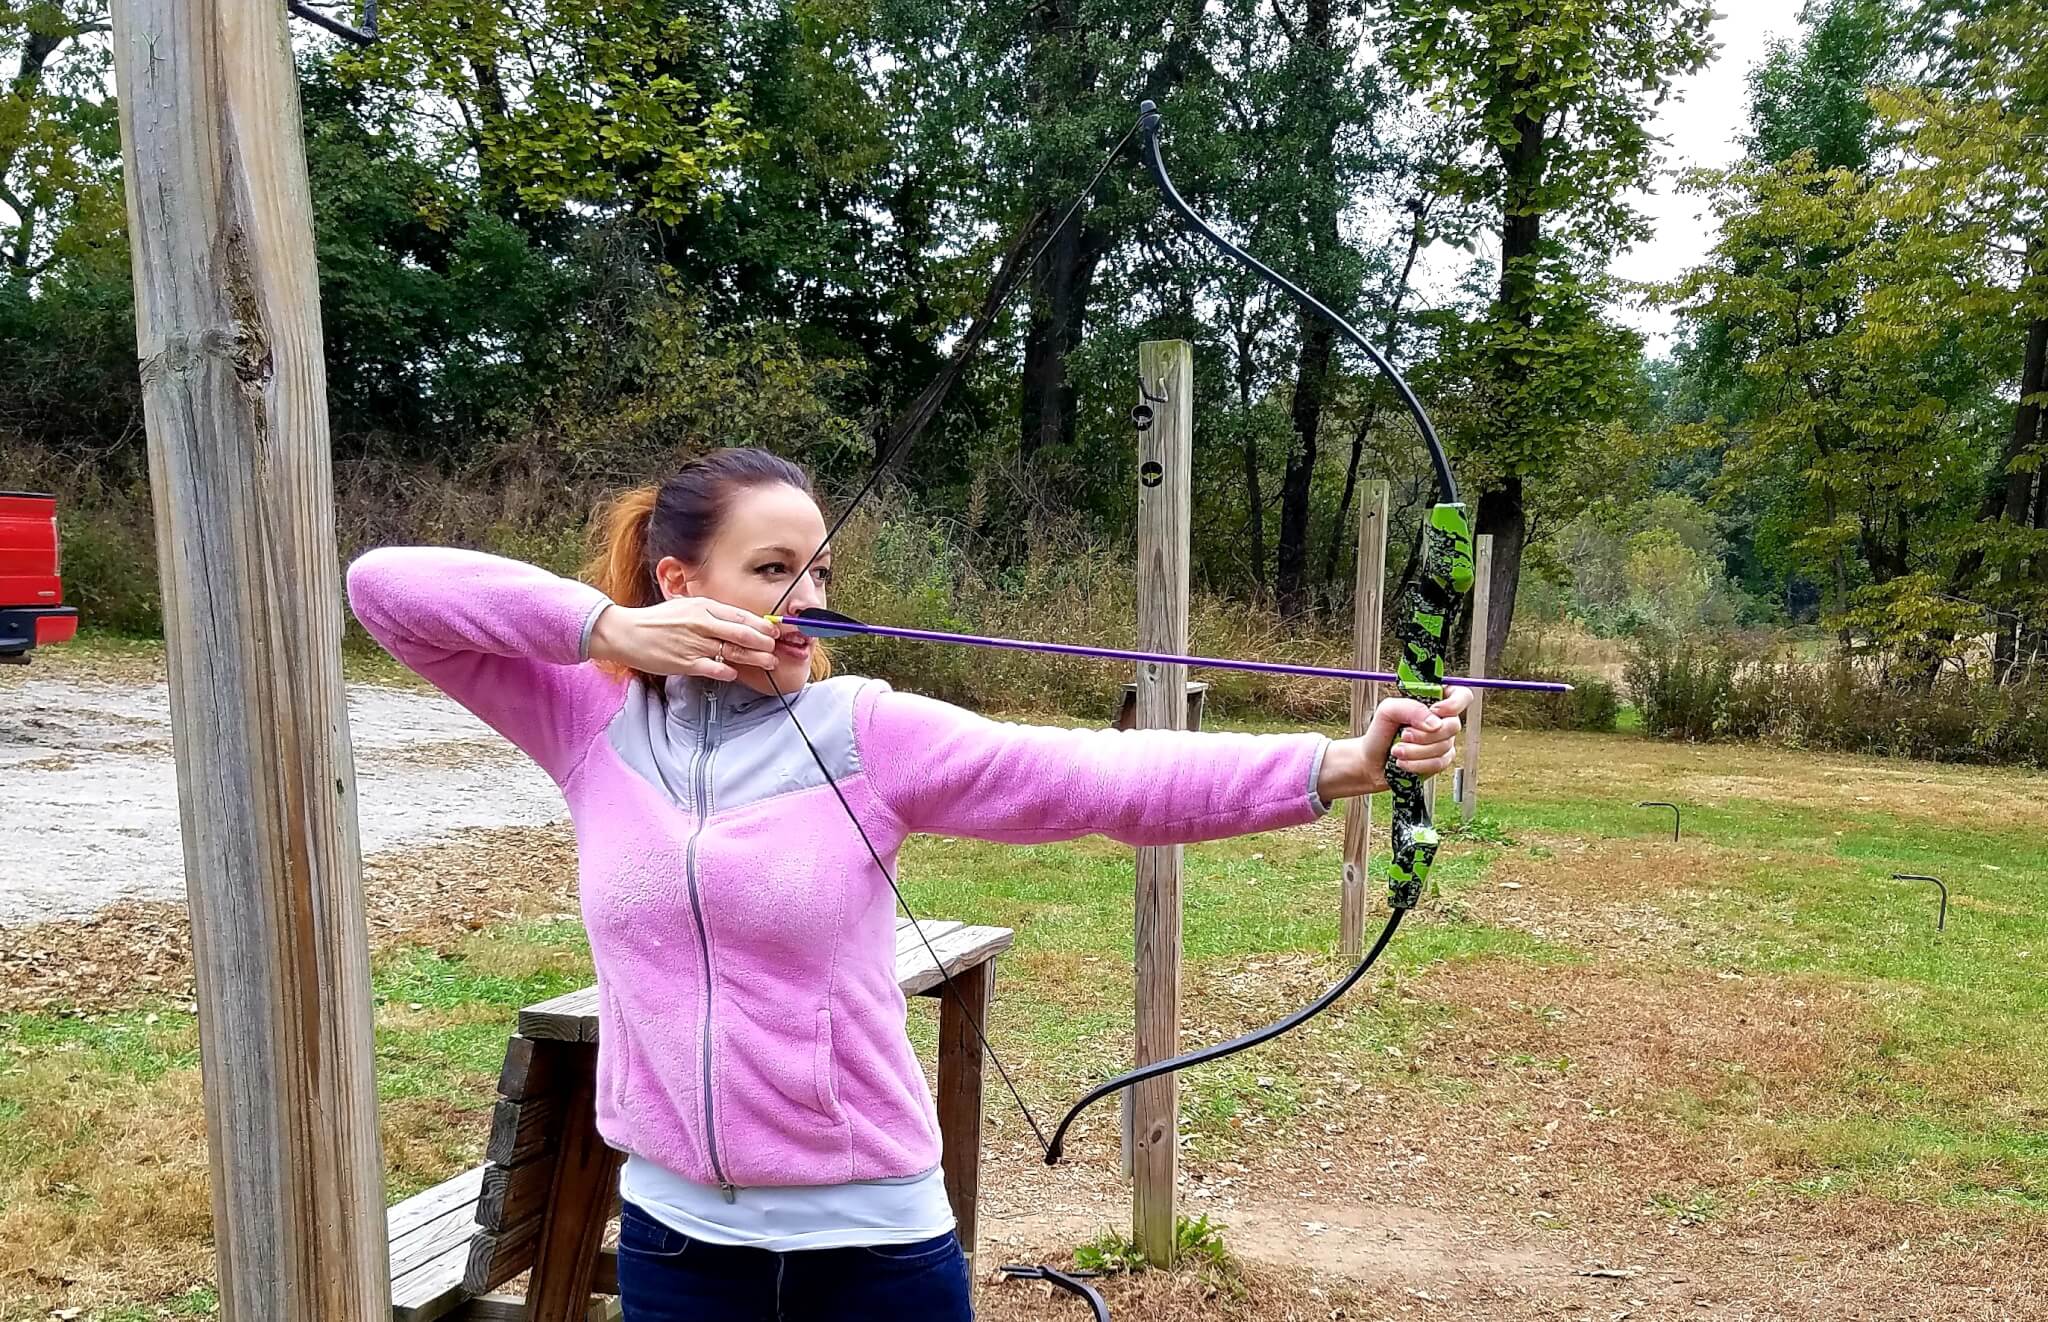 21. Archery for a cause with Heart of the Outdoors